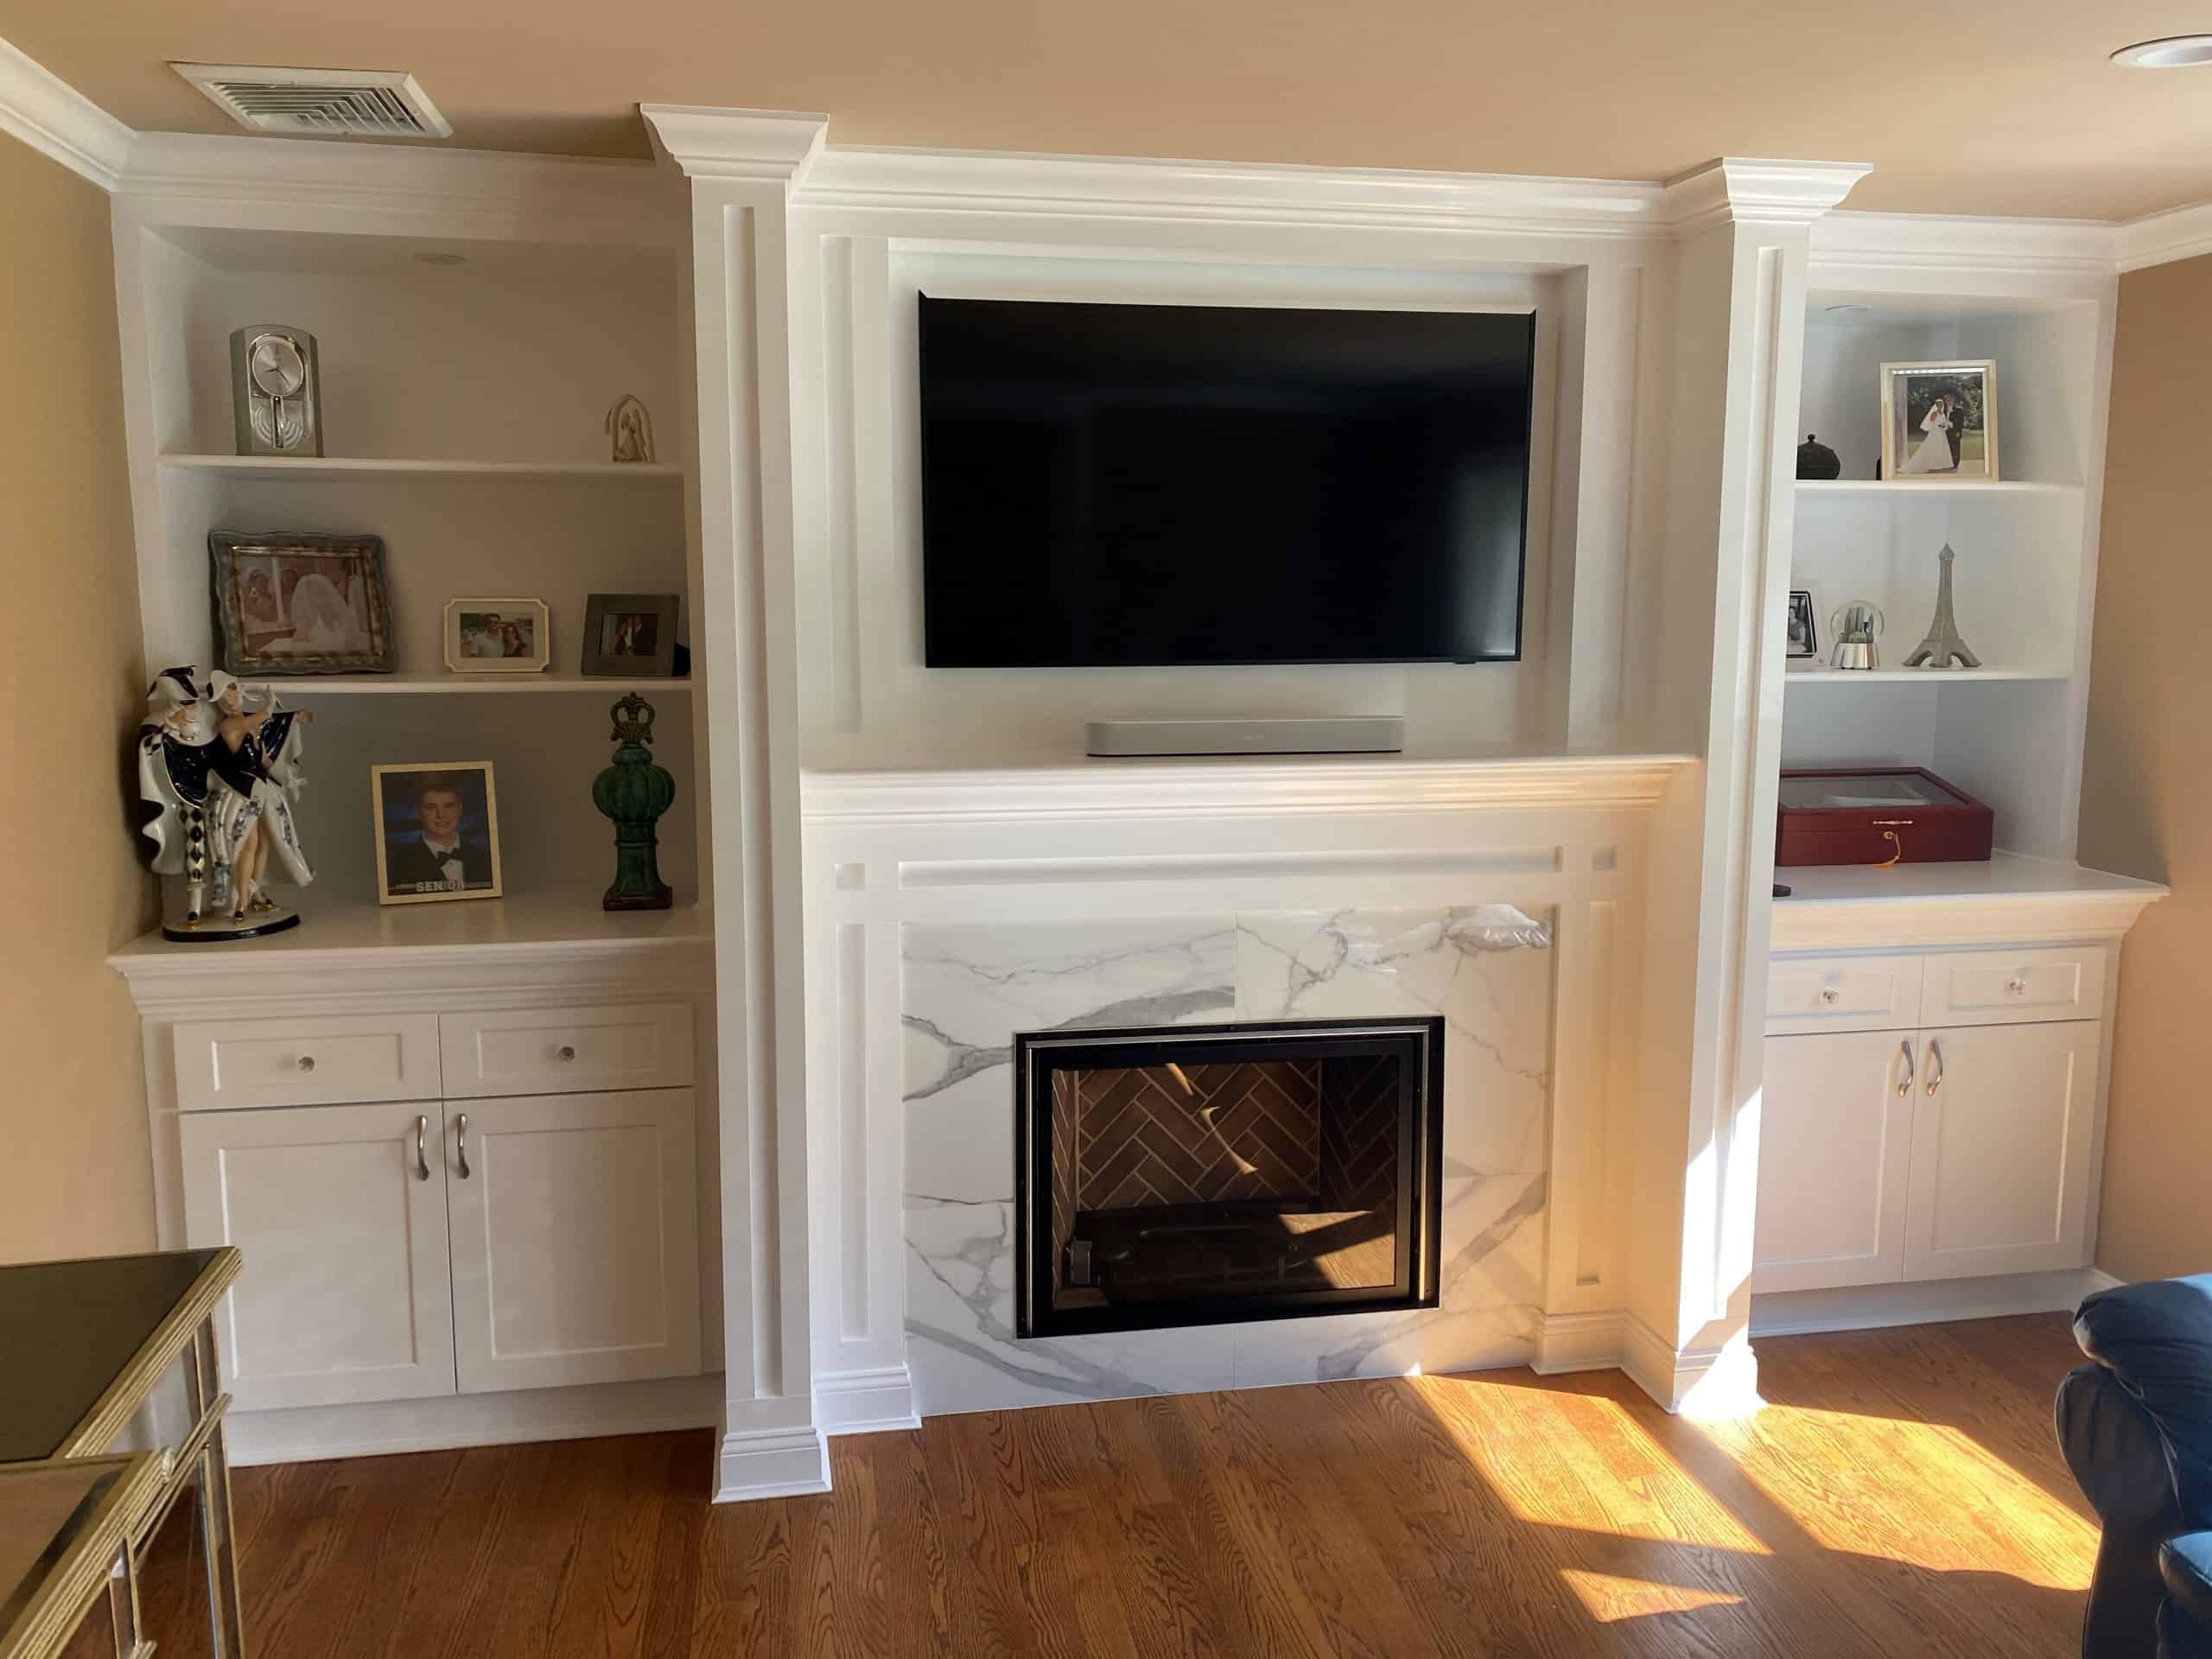 Completed Fireplace, mantel, and bookcases by Panther Siding and Windows.